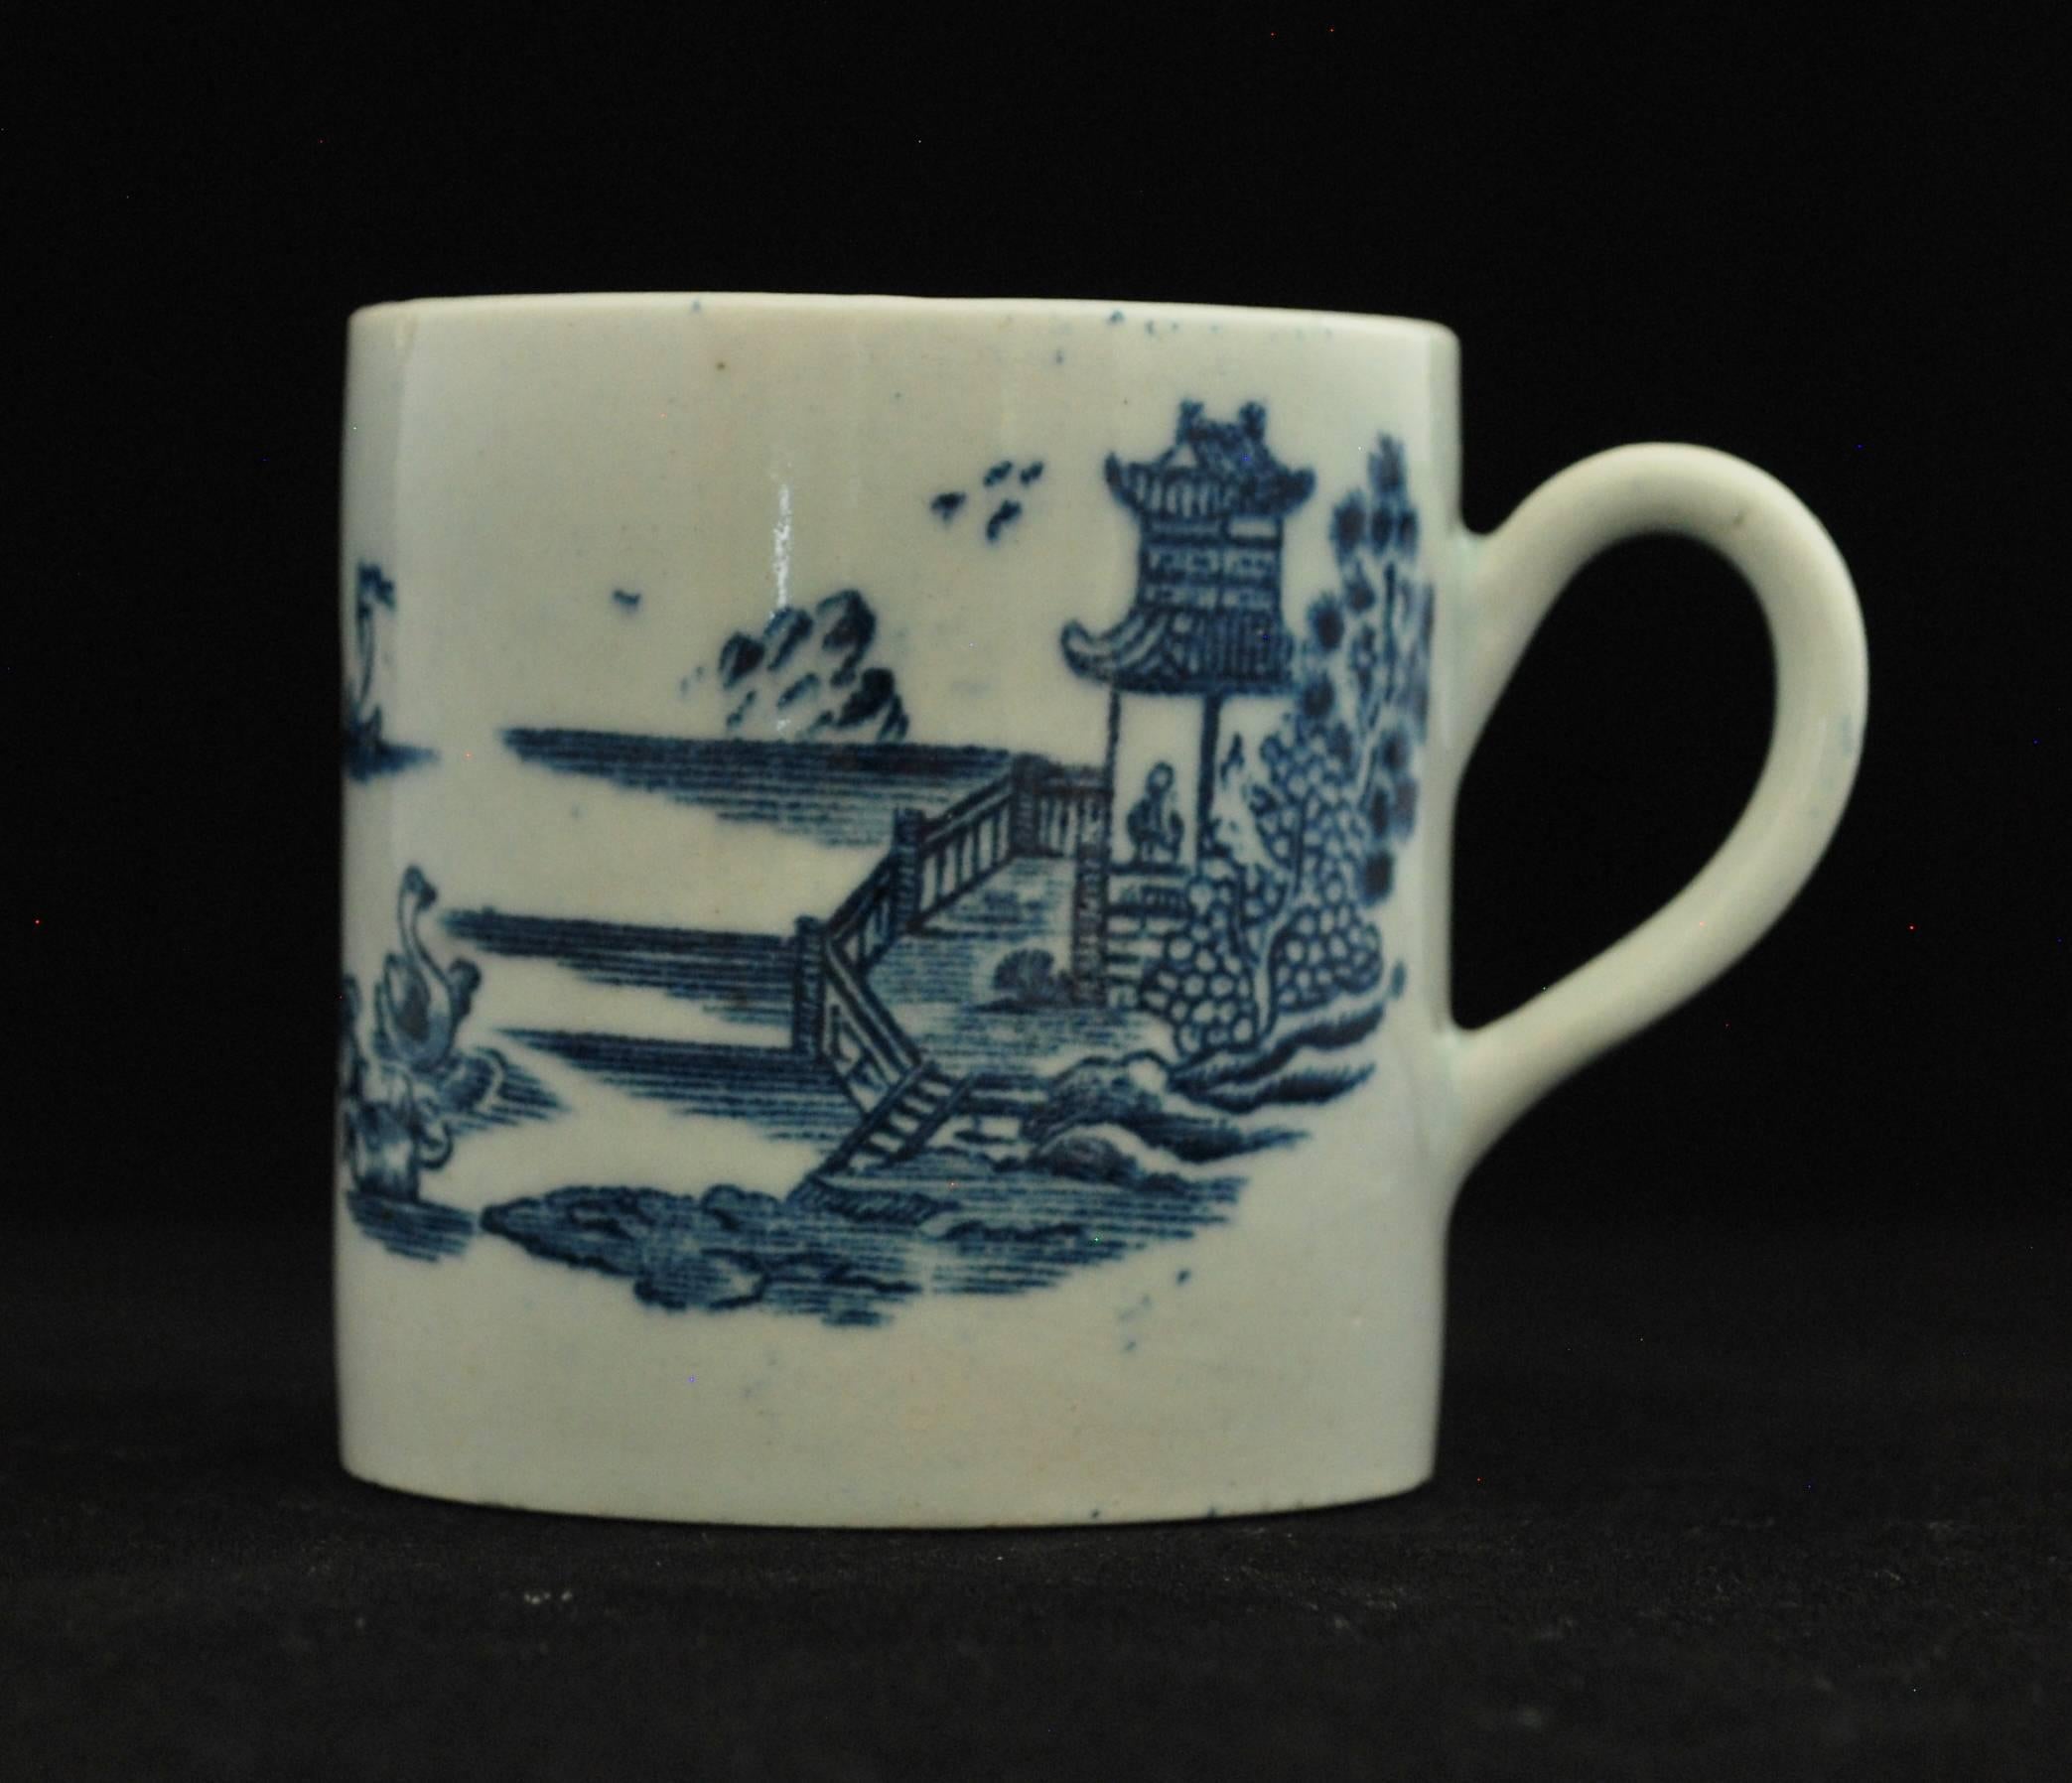 Decorated with an under-glaze blue print of a Chinese landscape, featuring a man at the window of a pagoda, admiring swans on the lake.

Bow didn't produce very much in the way of transfer-printed porcelain. Of the 12 coffee cups in the Taylor